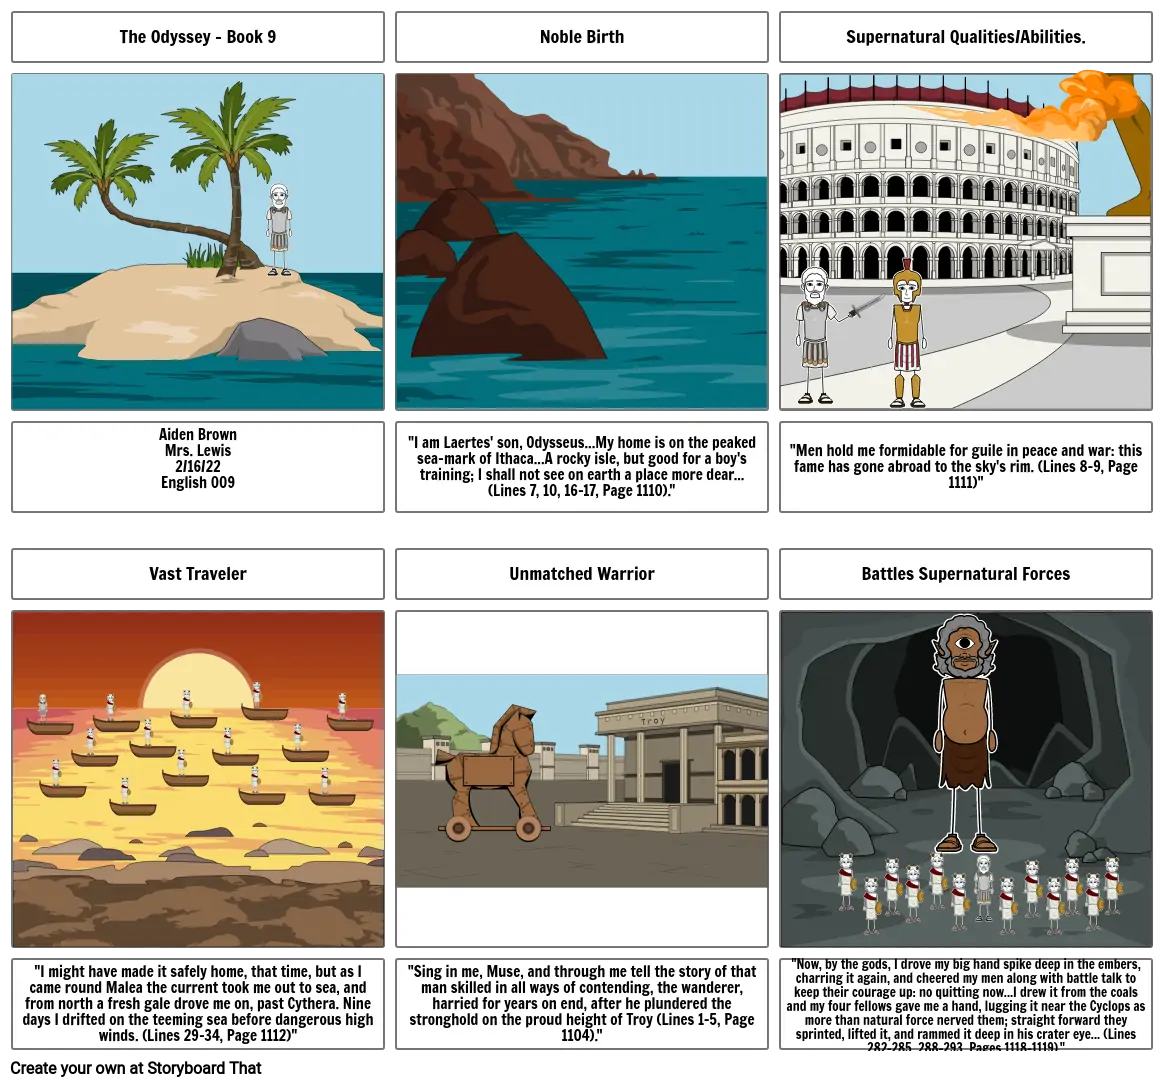 Epic Hero Storyboard - The Odyssey Book 9